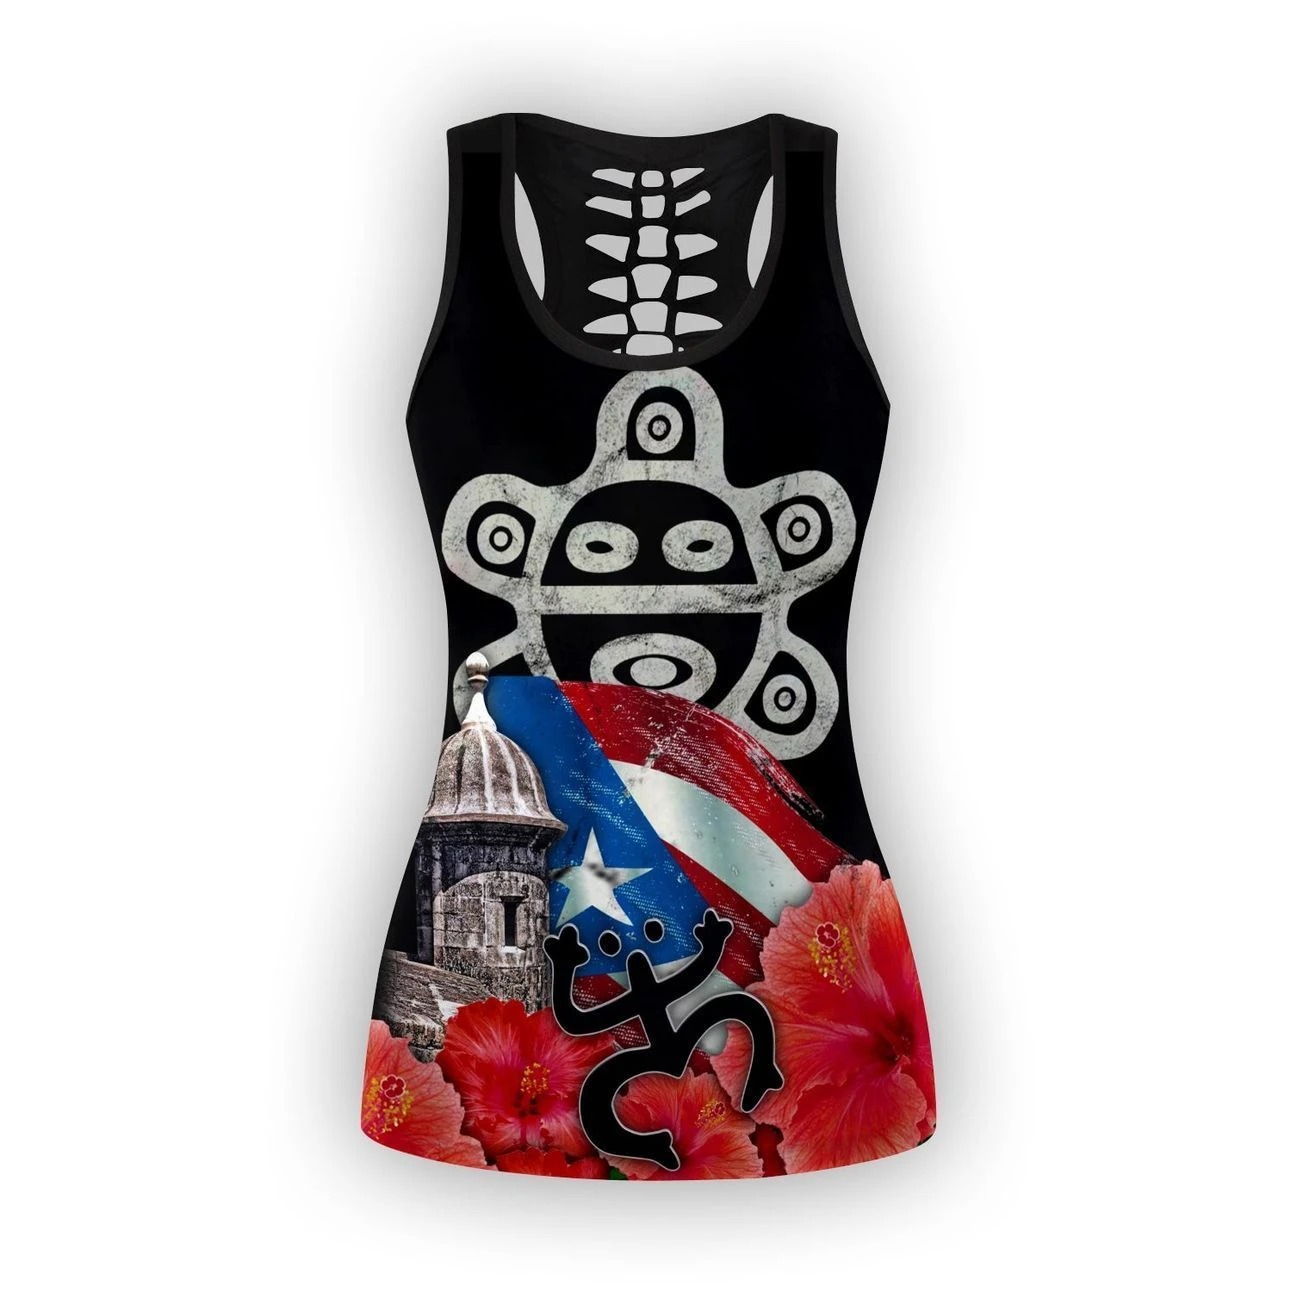 Puerto rice sol taino outfit legging and tank top2